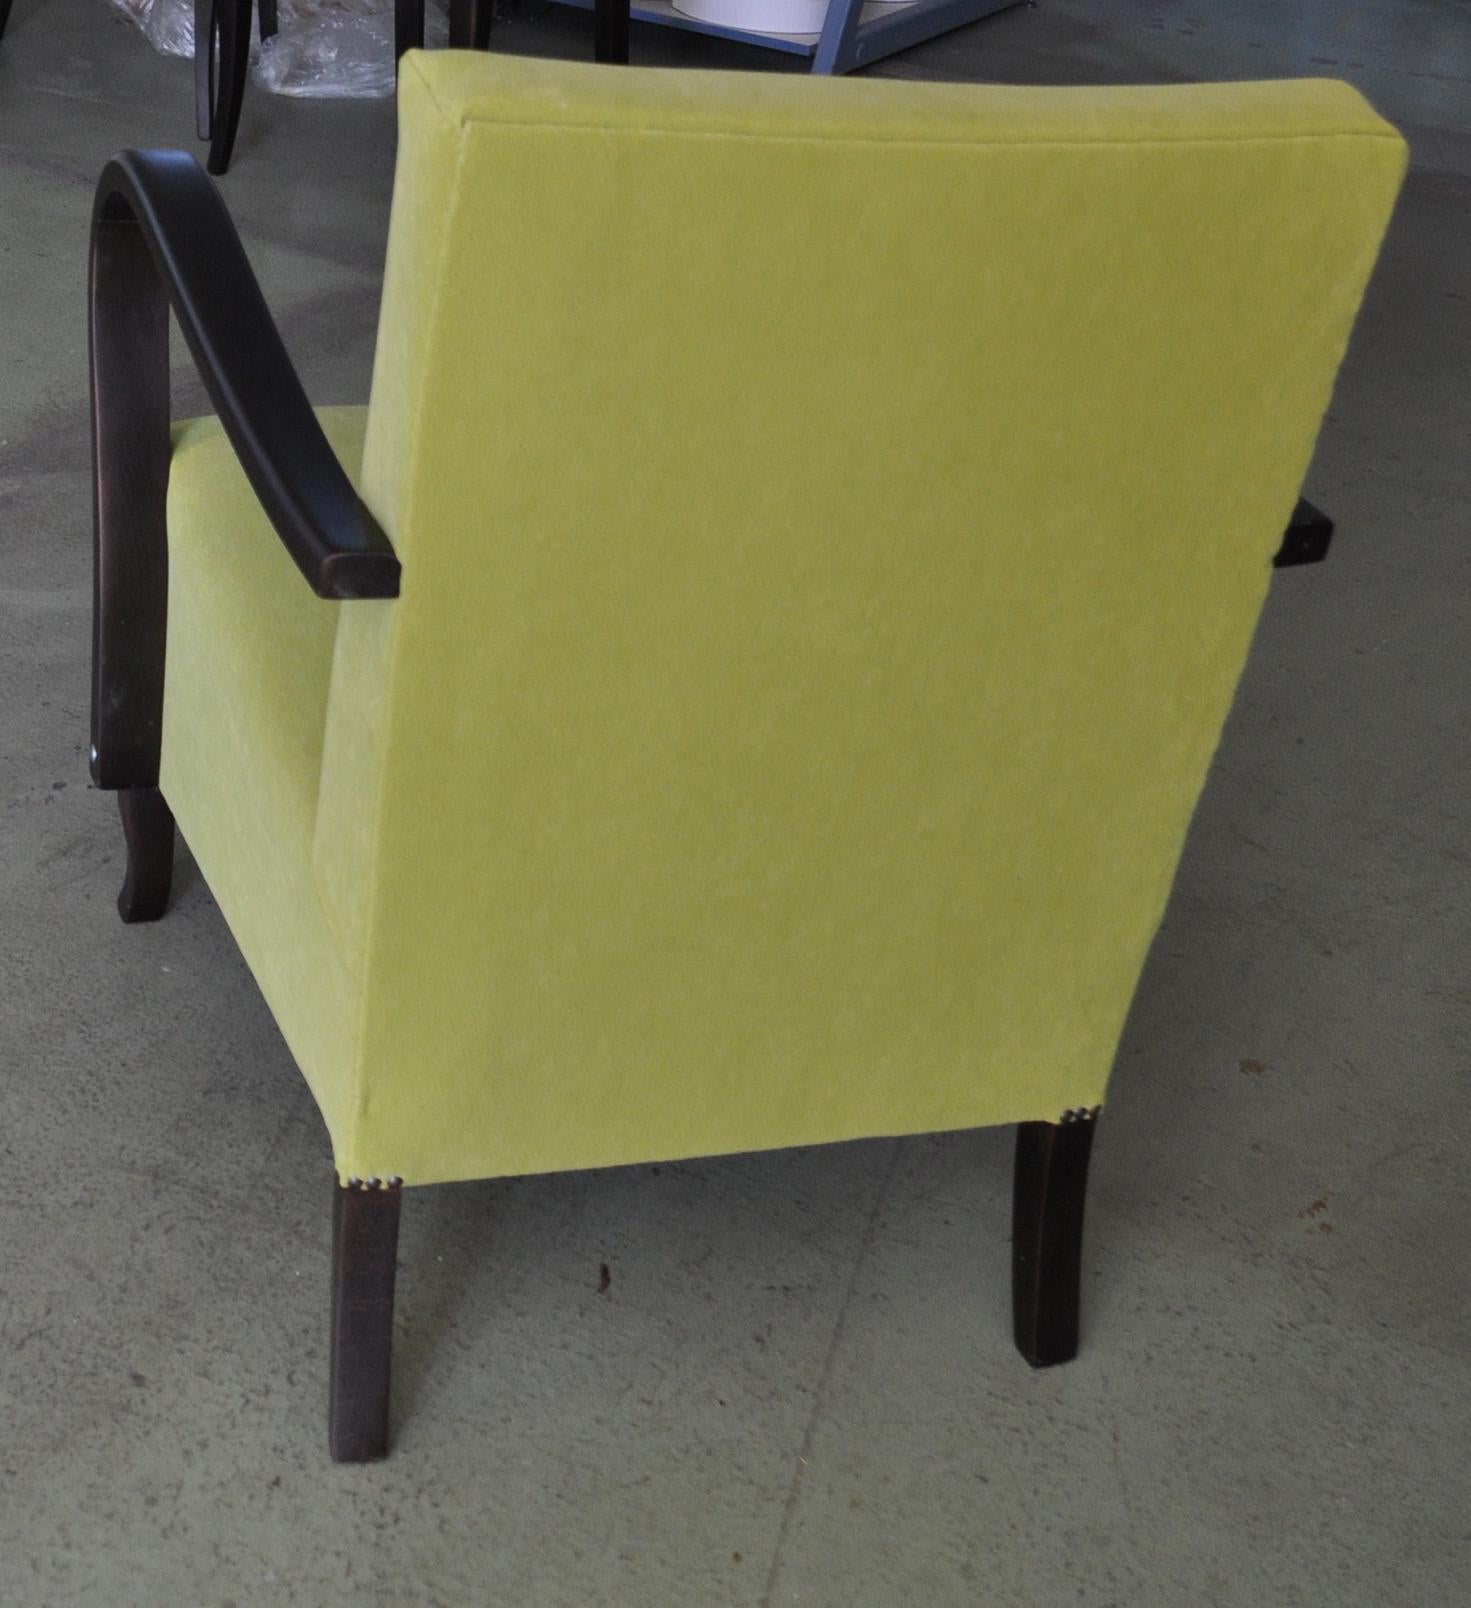 Art Deco green armchair, circa 1920s.
Restored and re-upholstered.
They are period 1920s to 1930s Art Deco chairs, they are not reproduction or 'in the style of', these are the real thing!
Re-upholstered, the fabric of the trim is